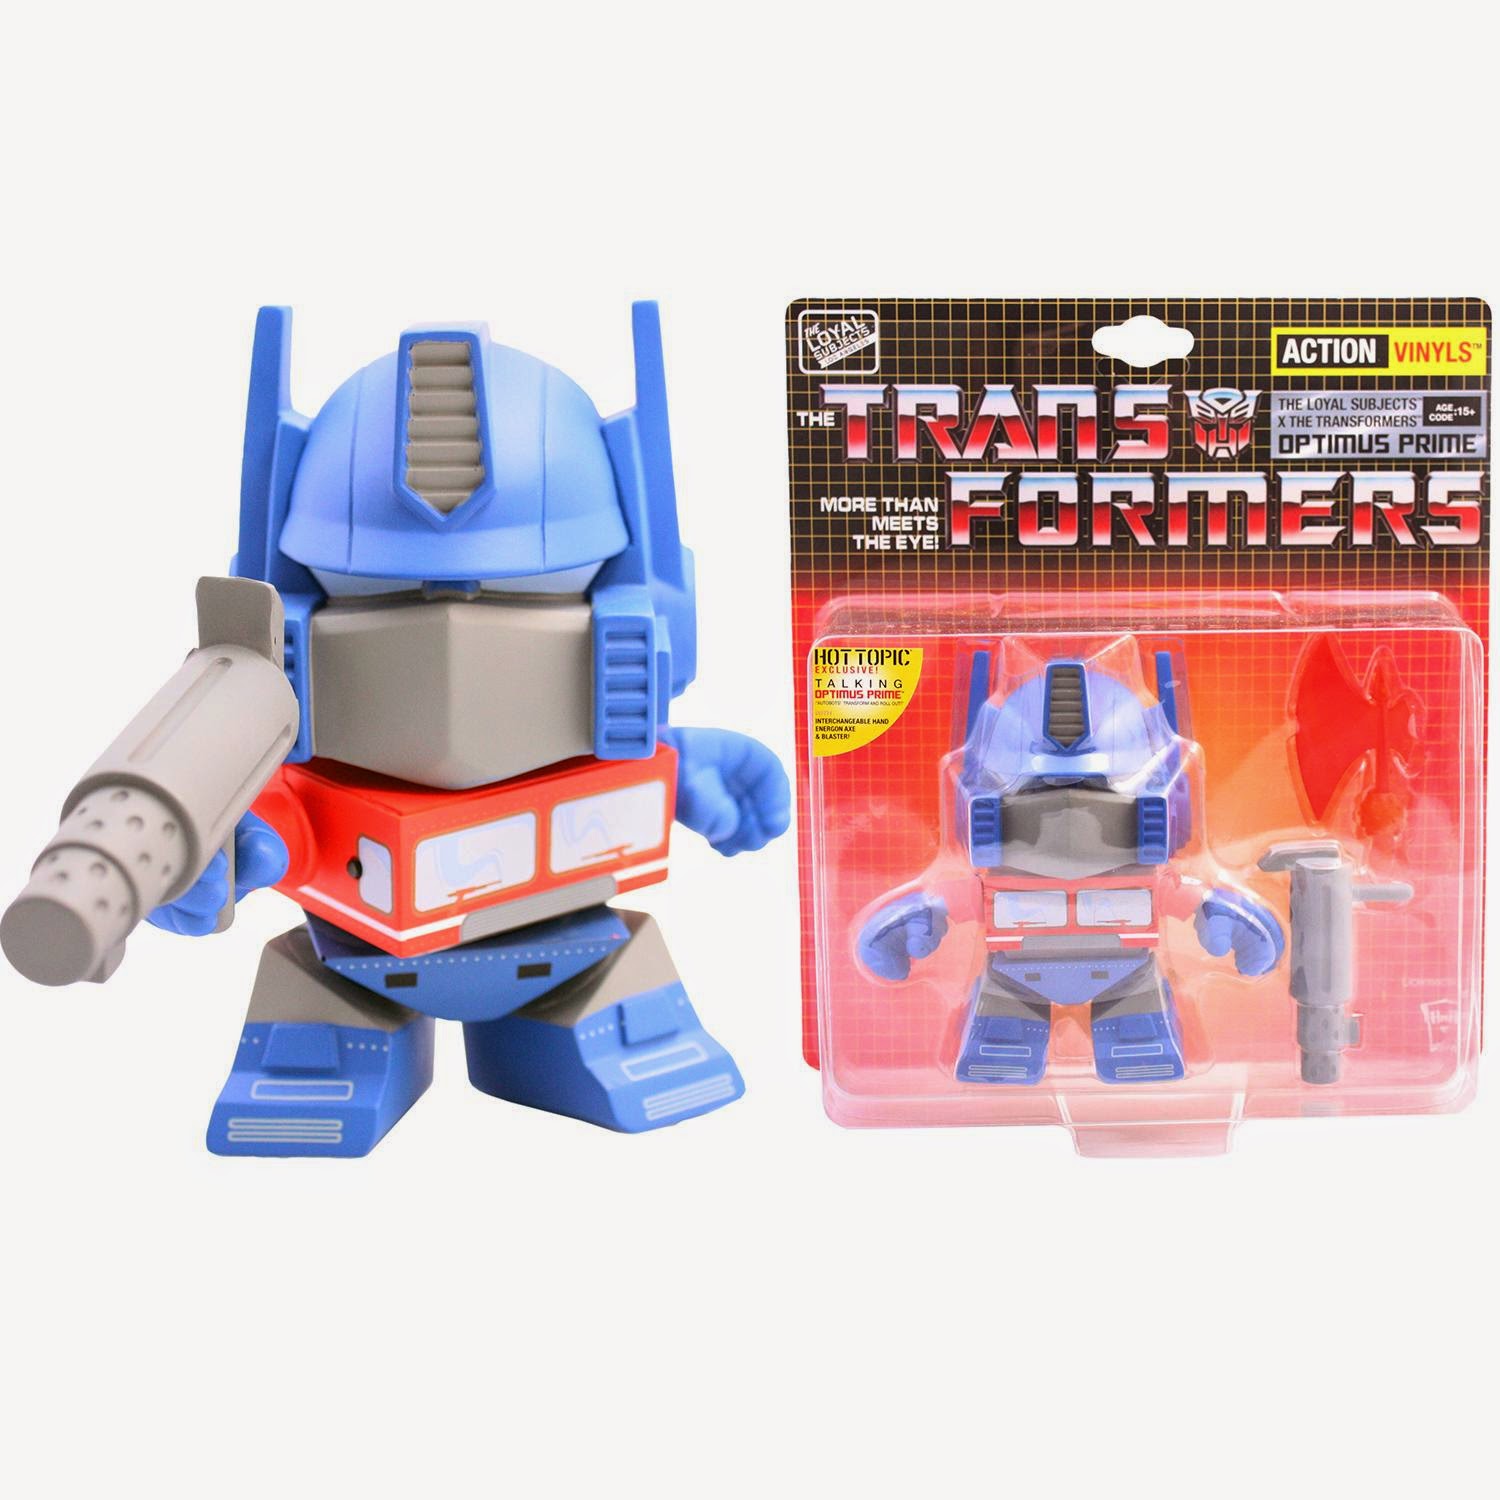 Transformers 5.5” Vinyl Figures by The Loyal Subjects - Talking Optimus Prime